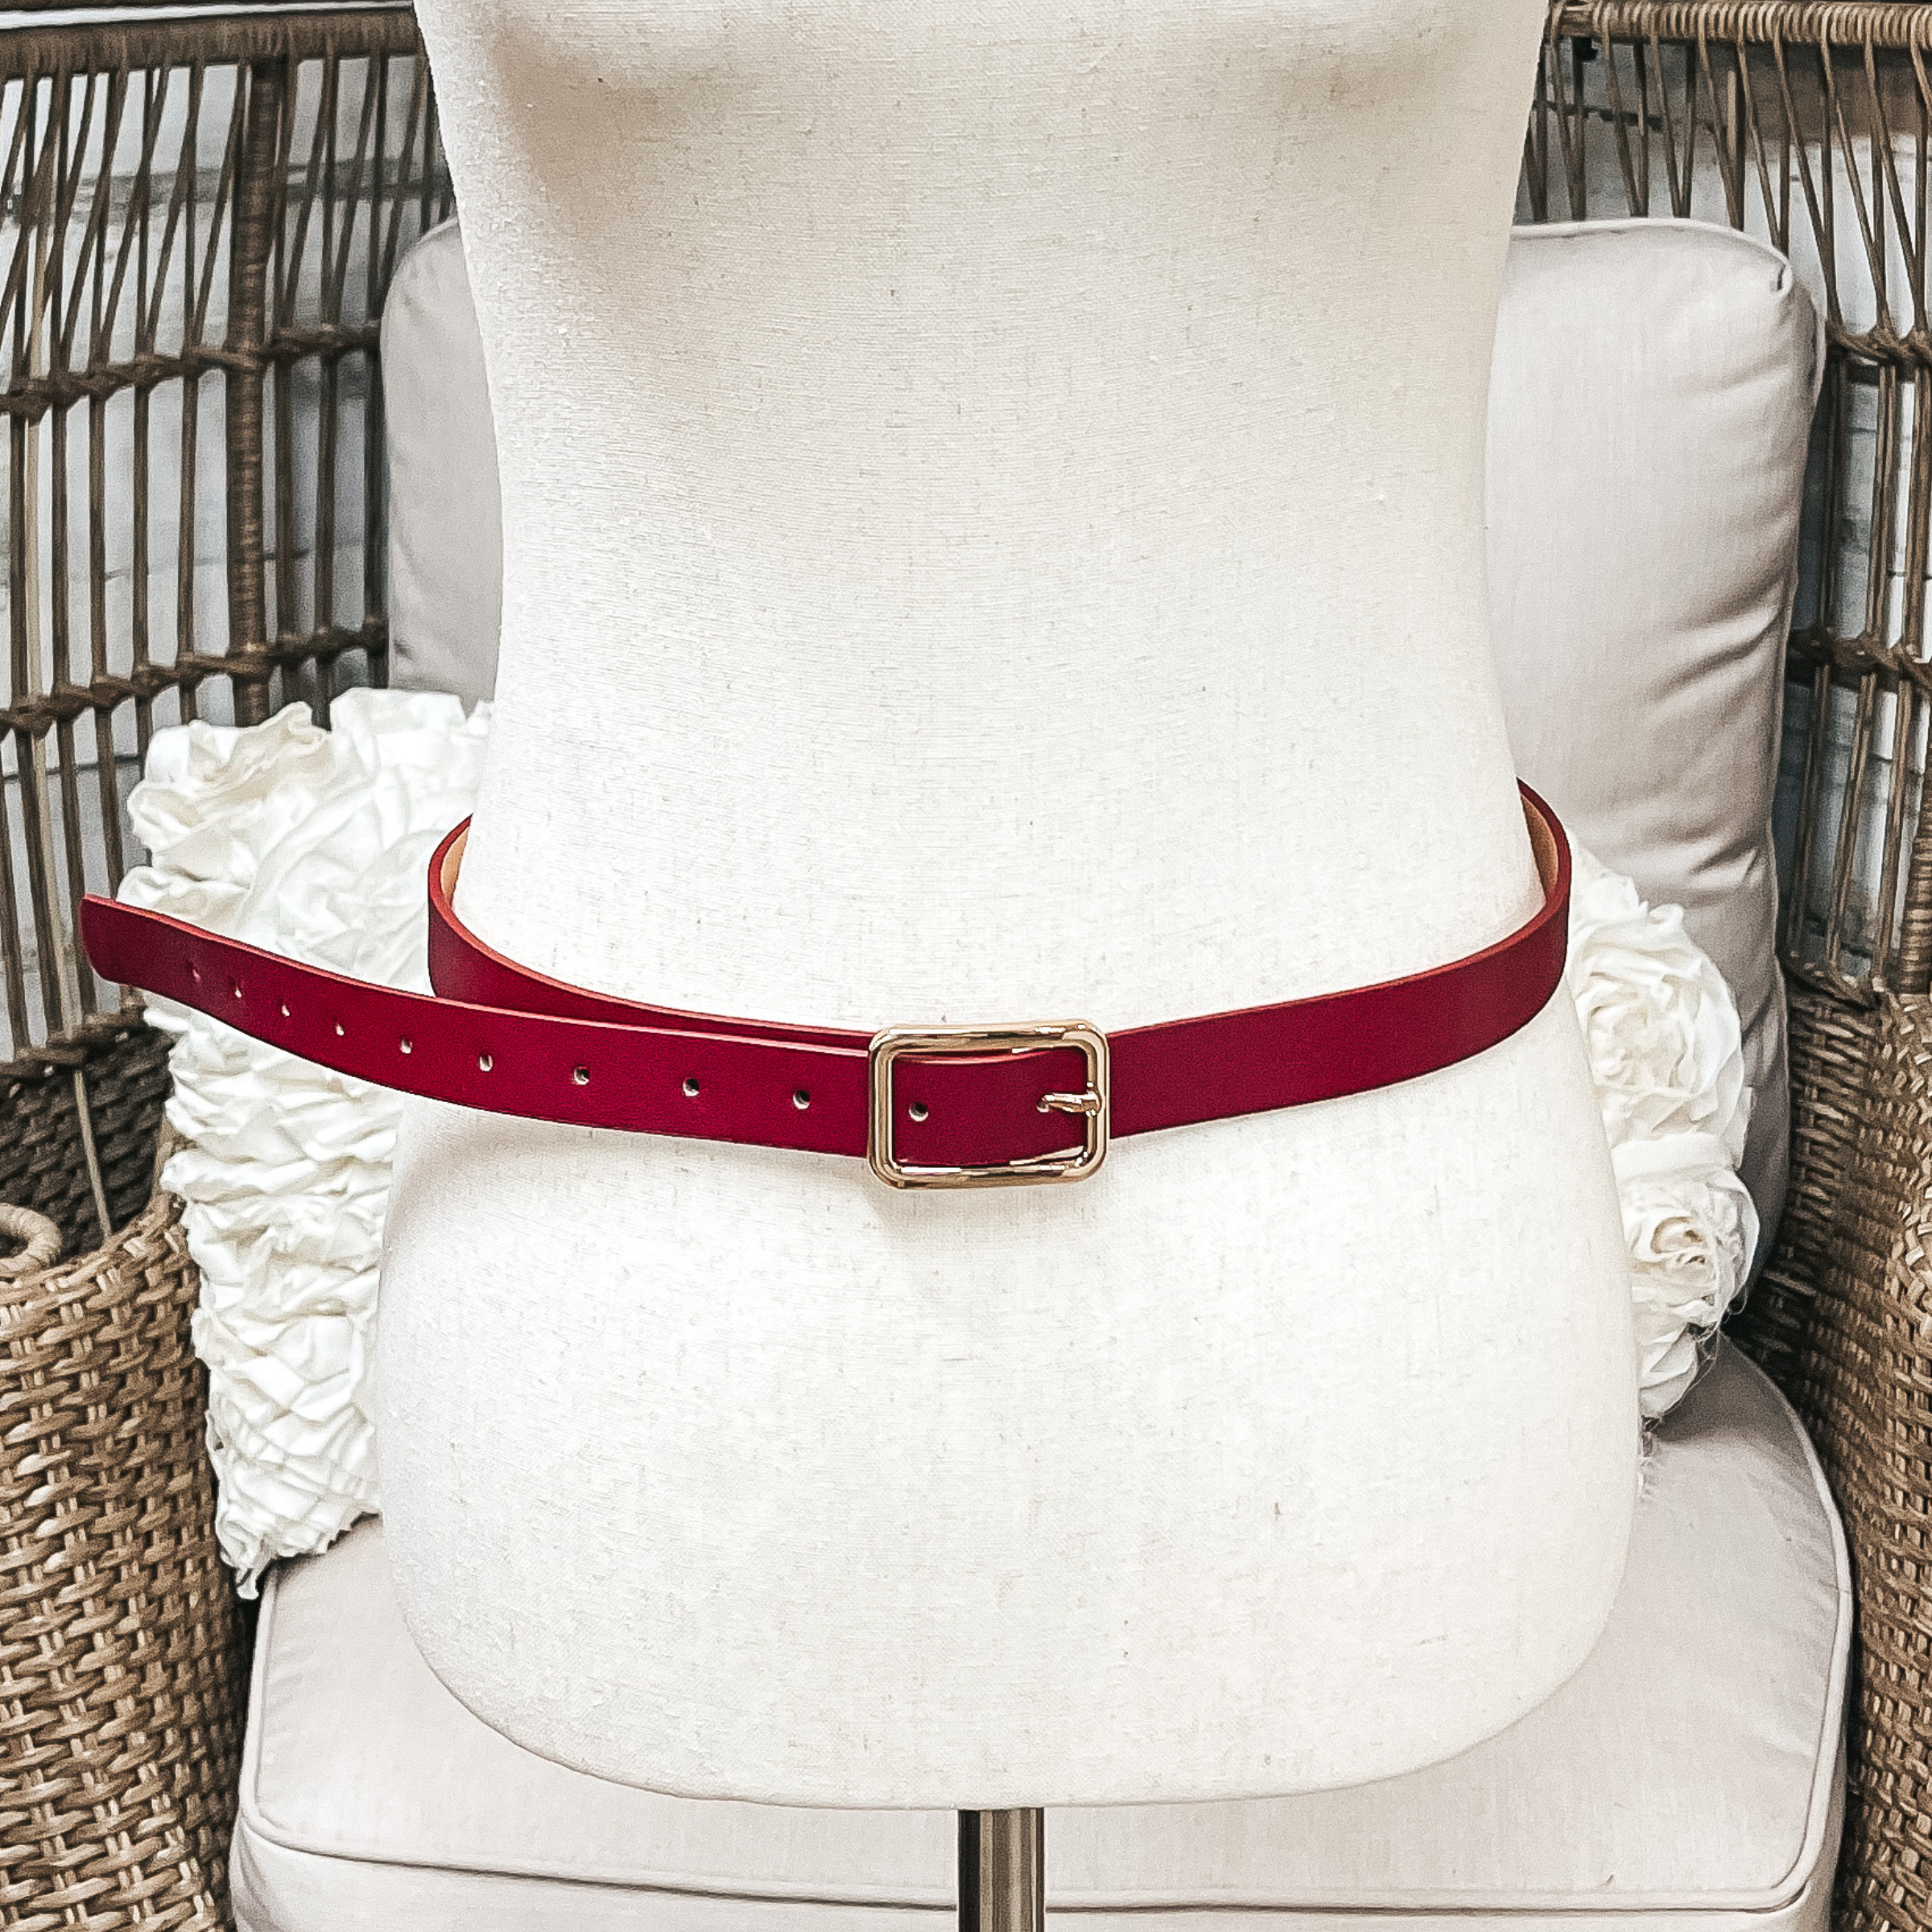 Set of Three | Skinny Fashion Belts in Burgundy, Cognac, and Forest Green